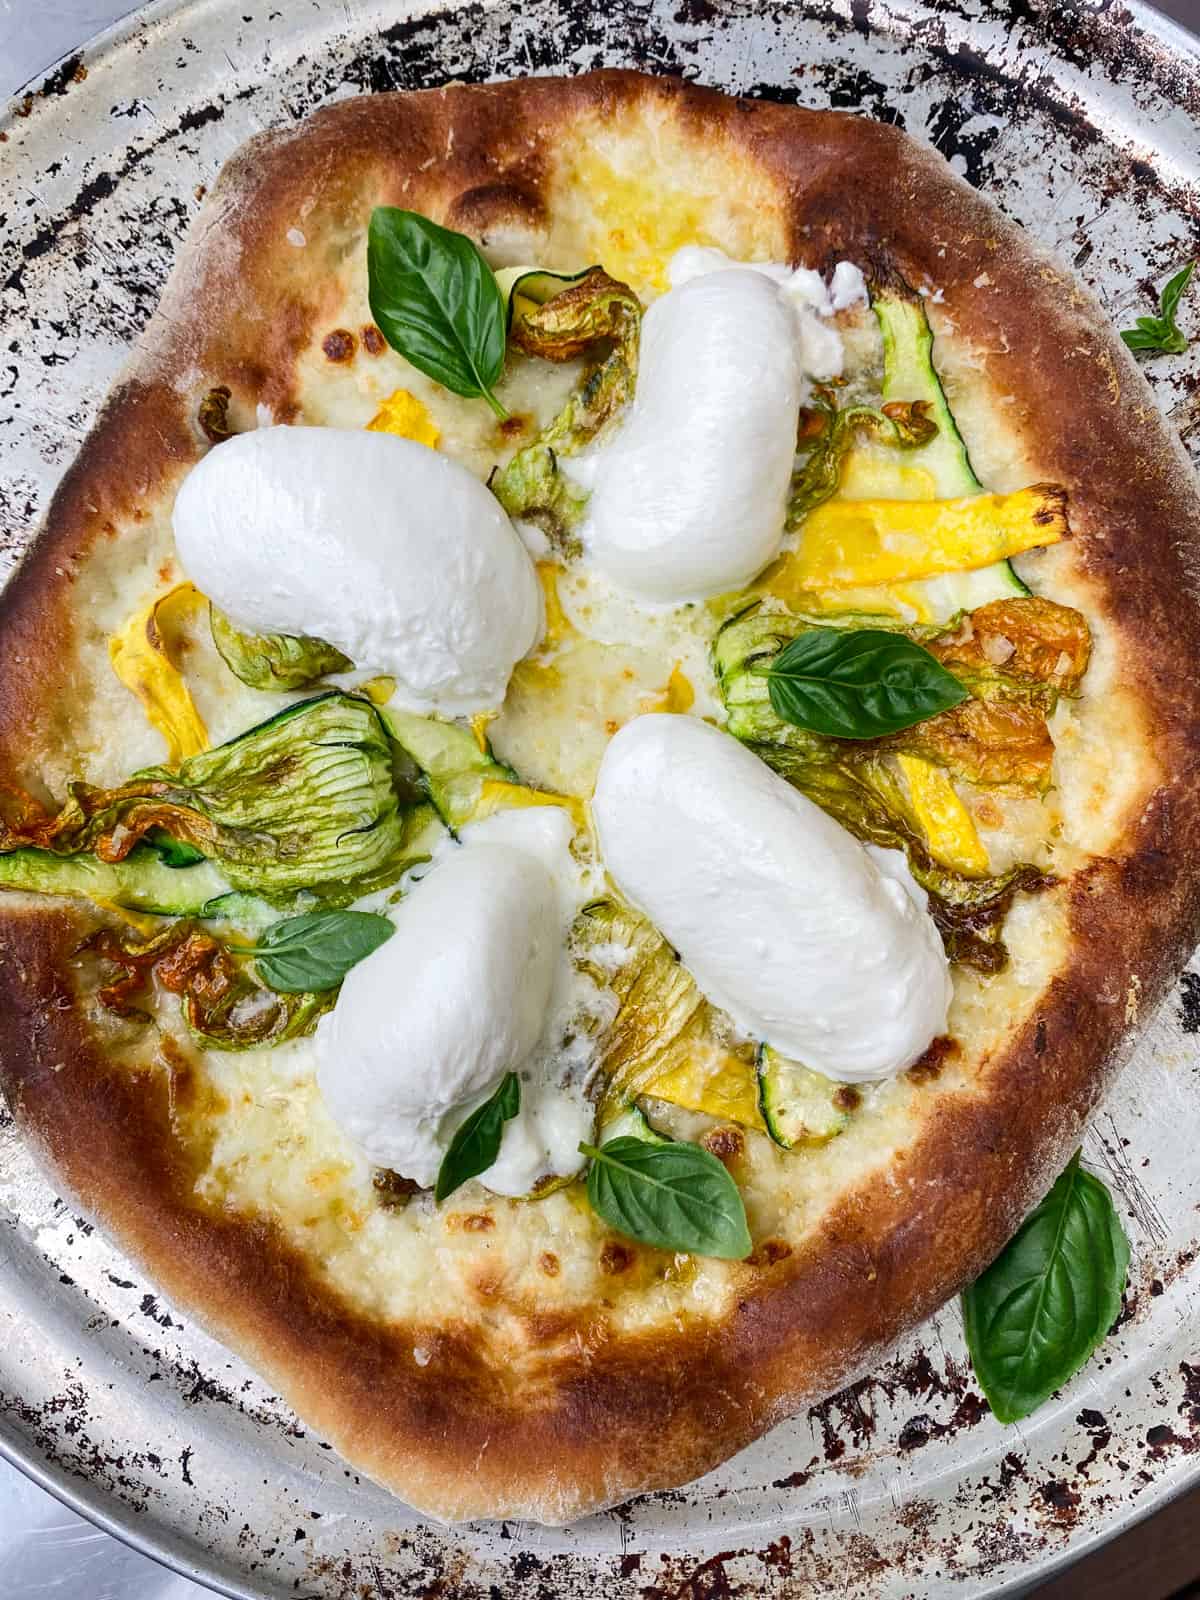 Once the zucchini flower pizza is done, top with roughly torn burrata cheese.